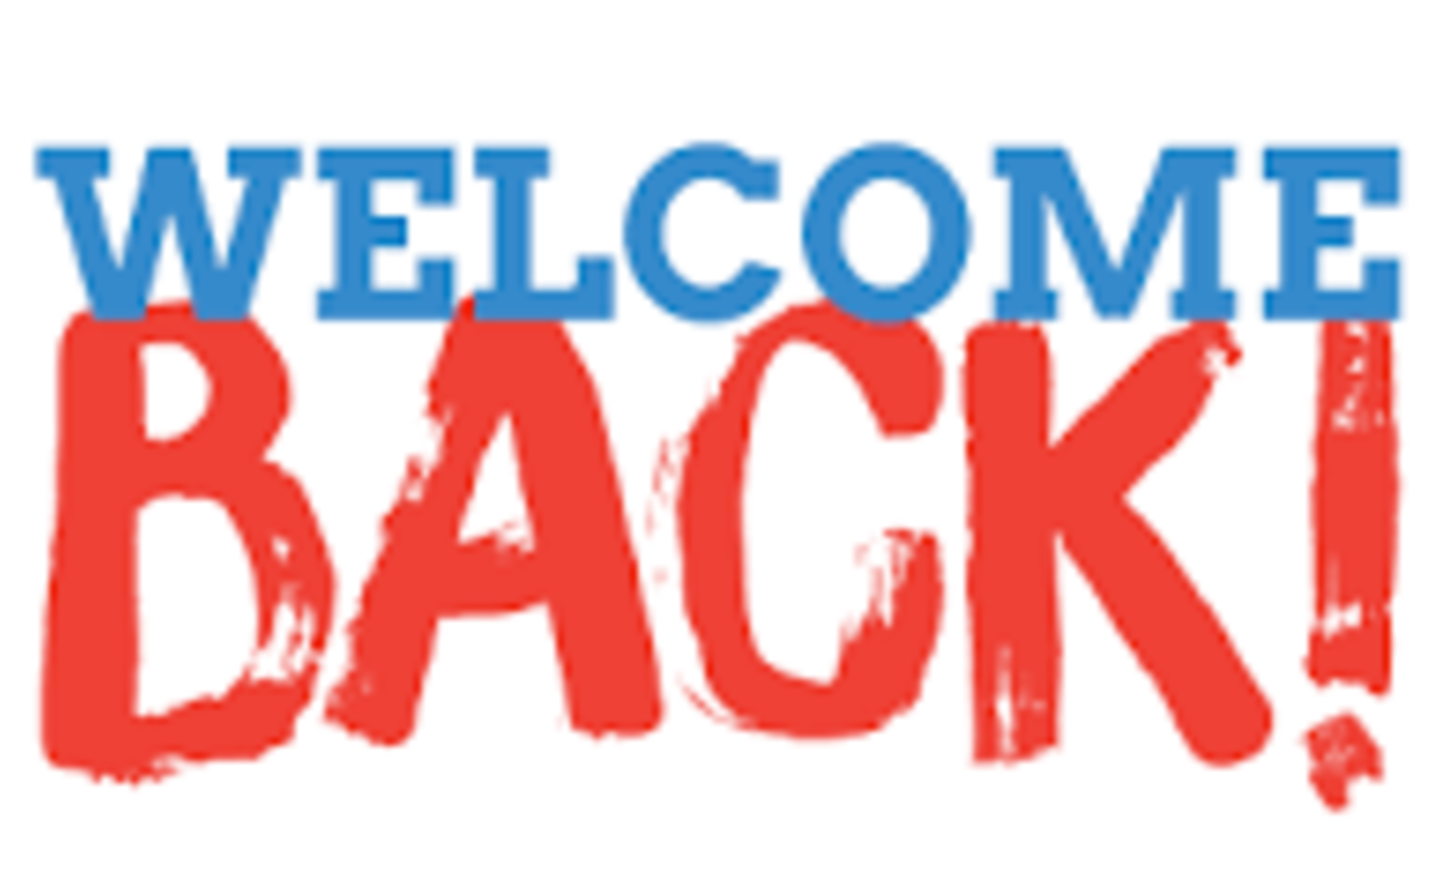 Image of Welcome Back!